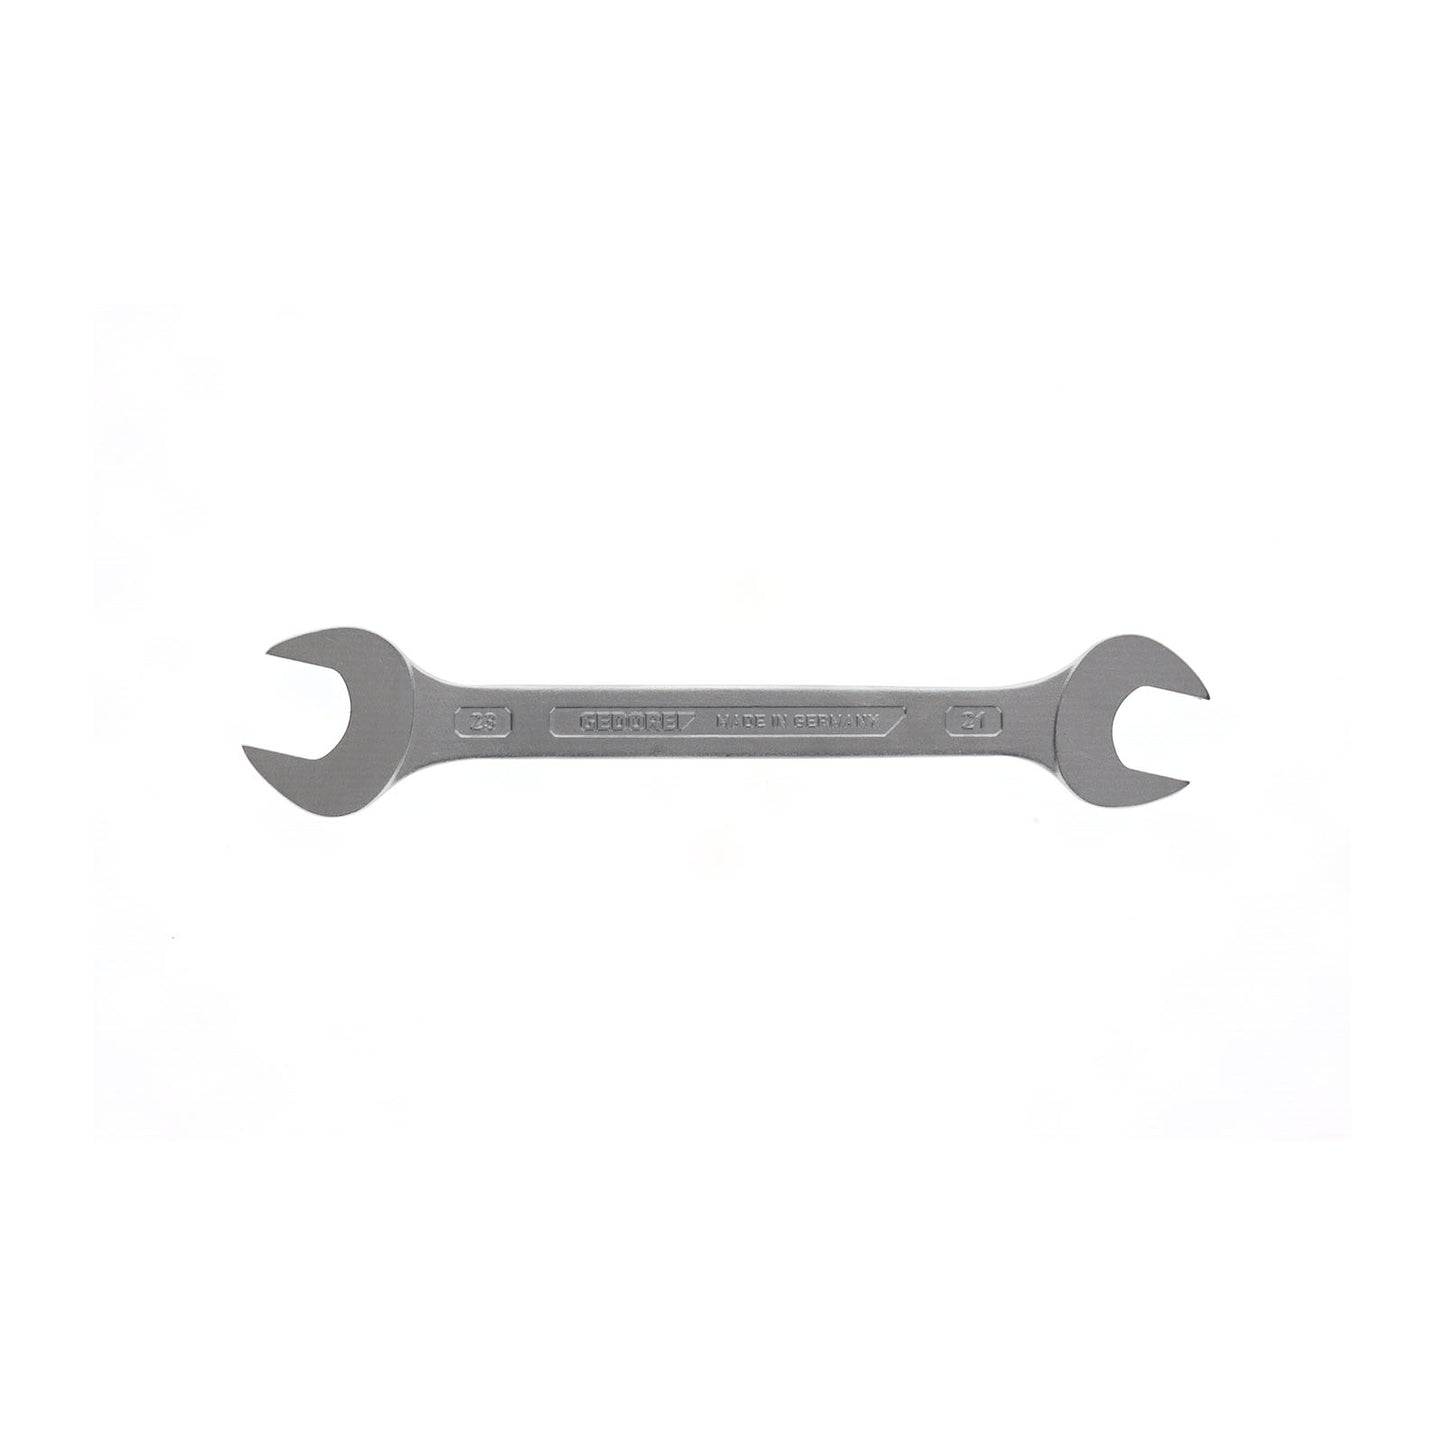 GEDORE 6 21X23 - 2-Mount Fixed Wrench, 21x23 (6067070)